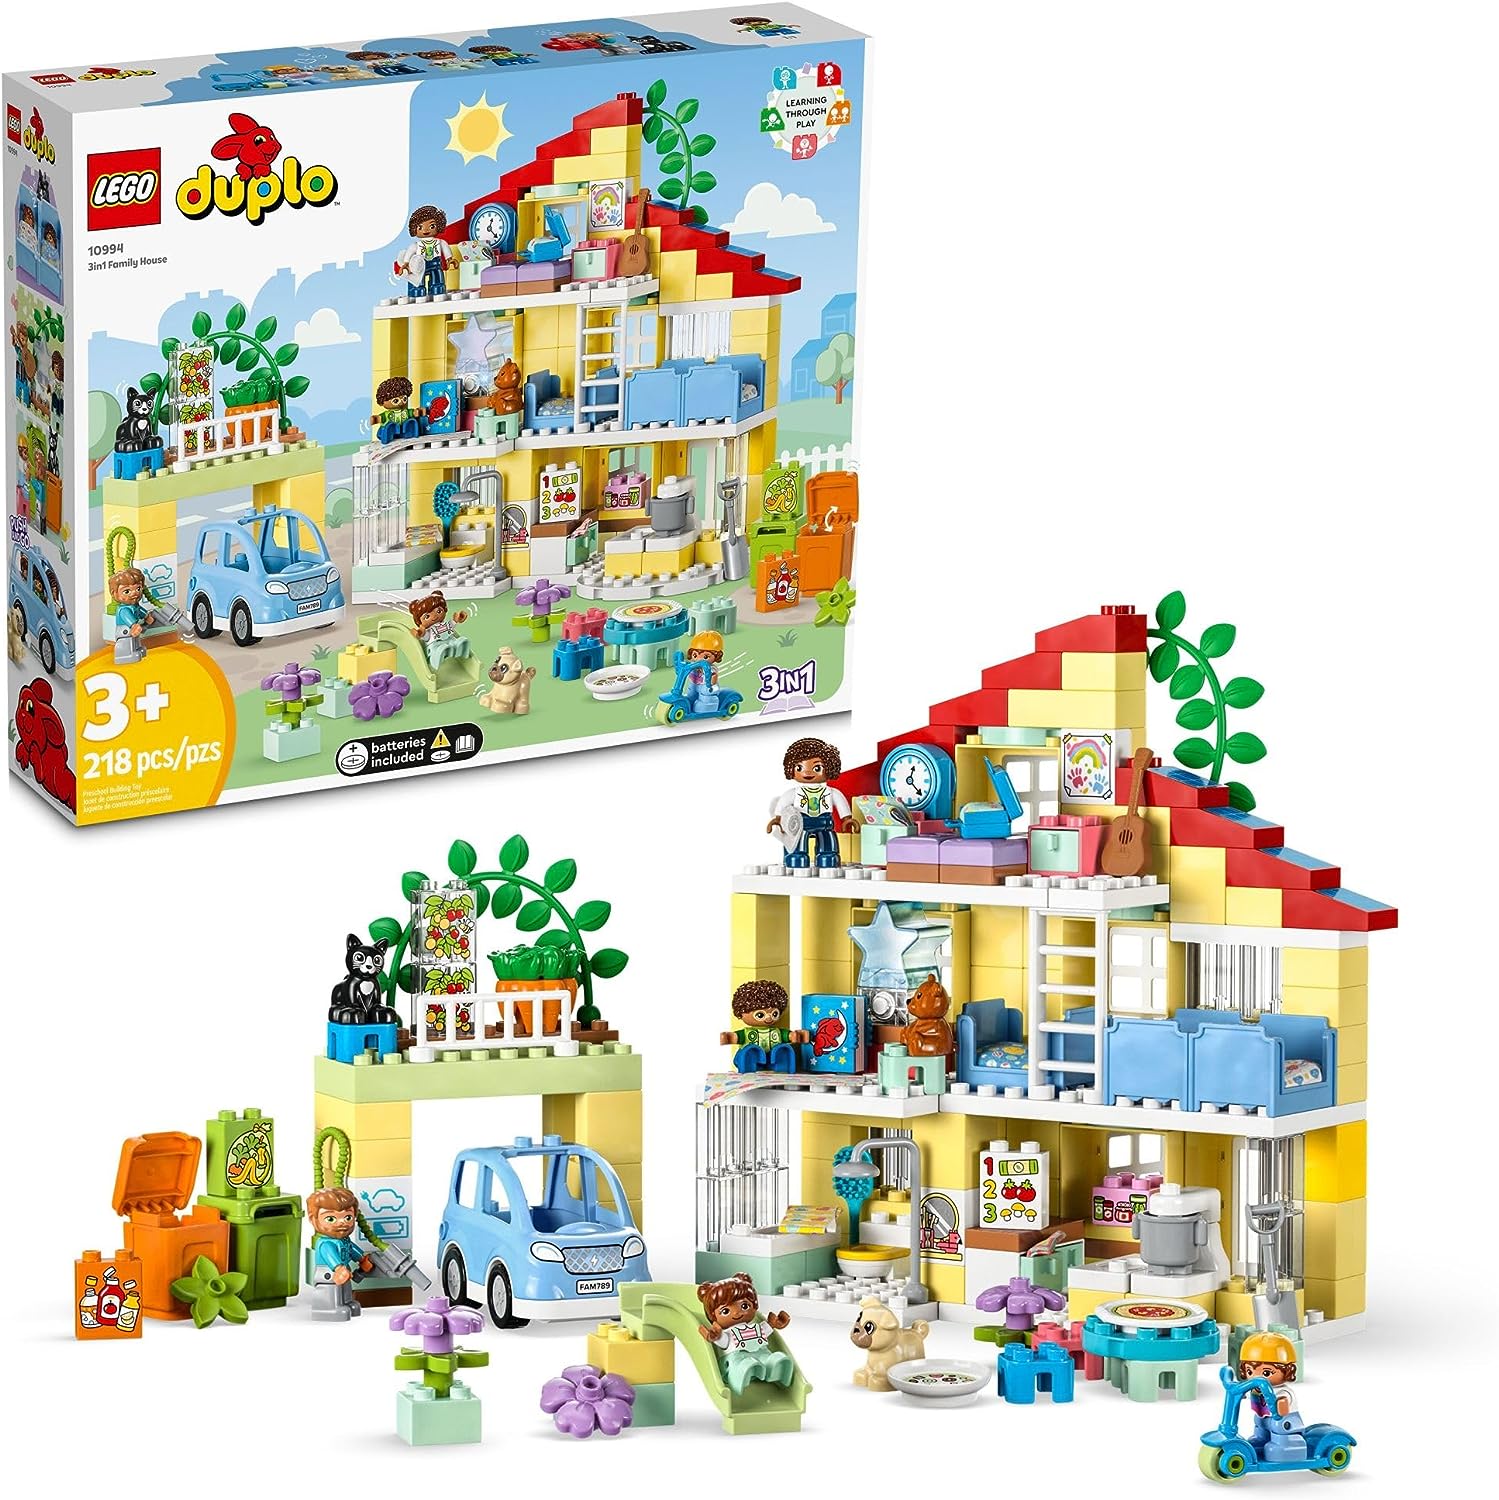 LEGO DUPLO Town 3in1 Family House 10994 Educational STEM Building Toy Set - $85